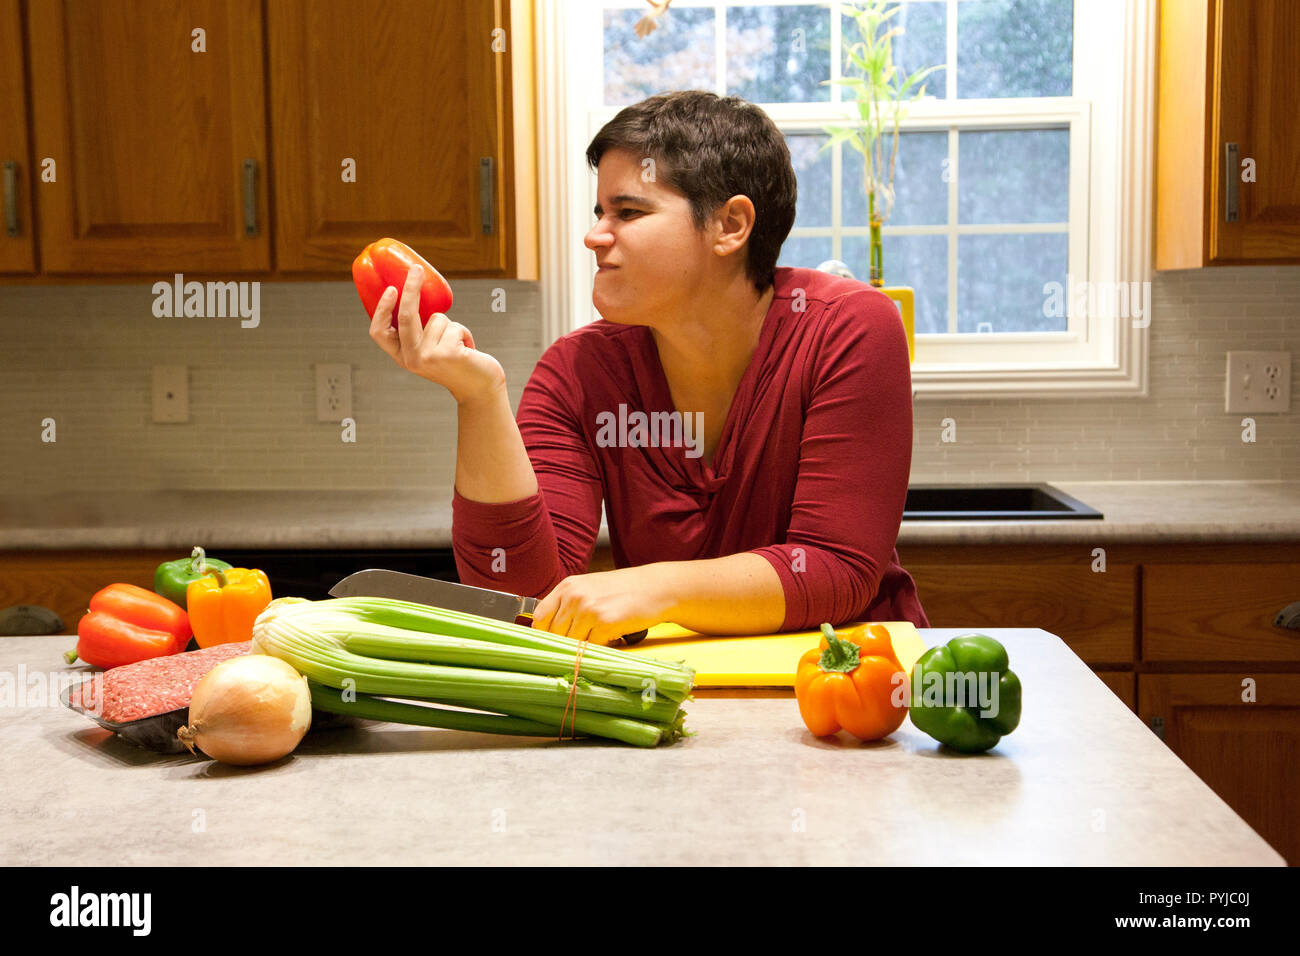 A woman holds a red bell pepper in her kitchen and makes an unhappy face Stock Photo